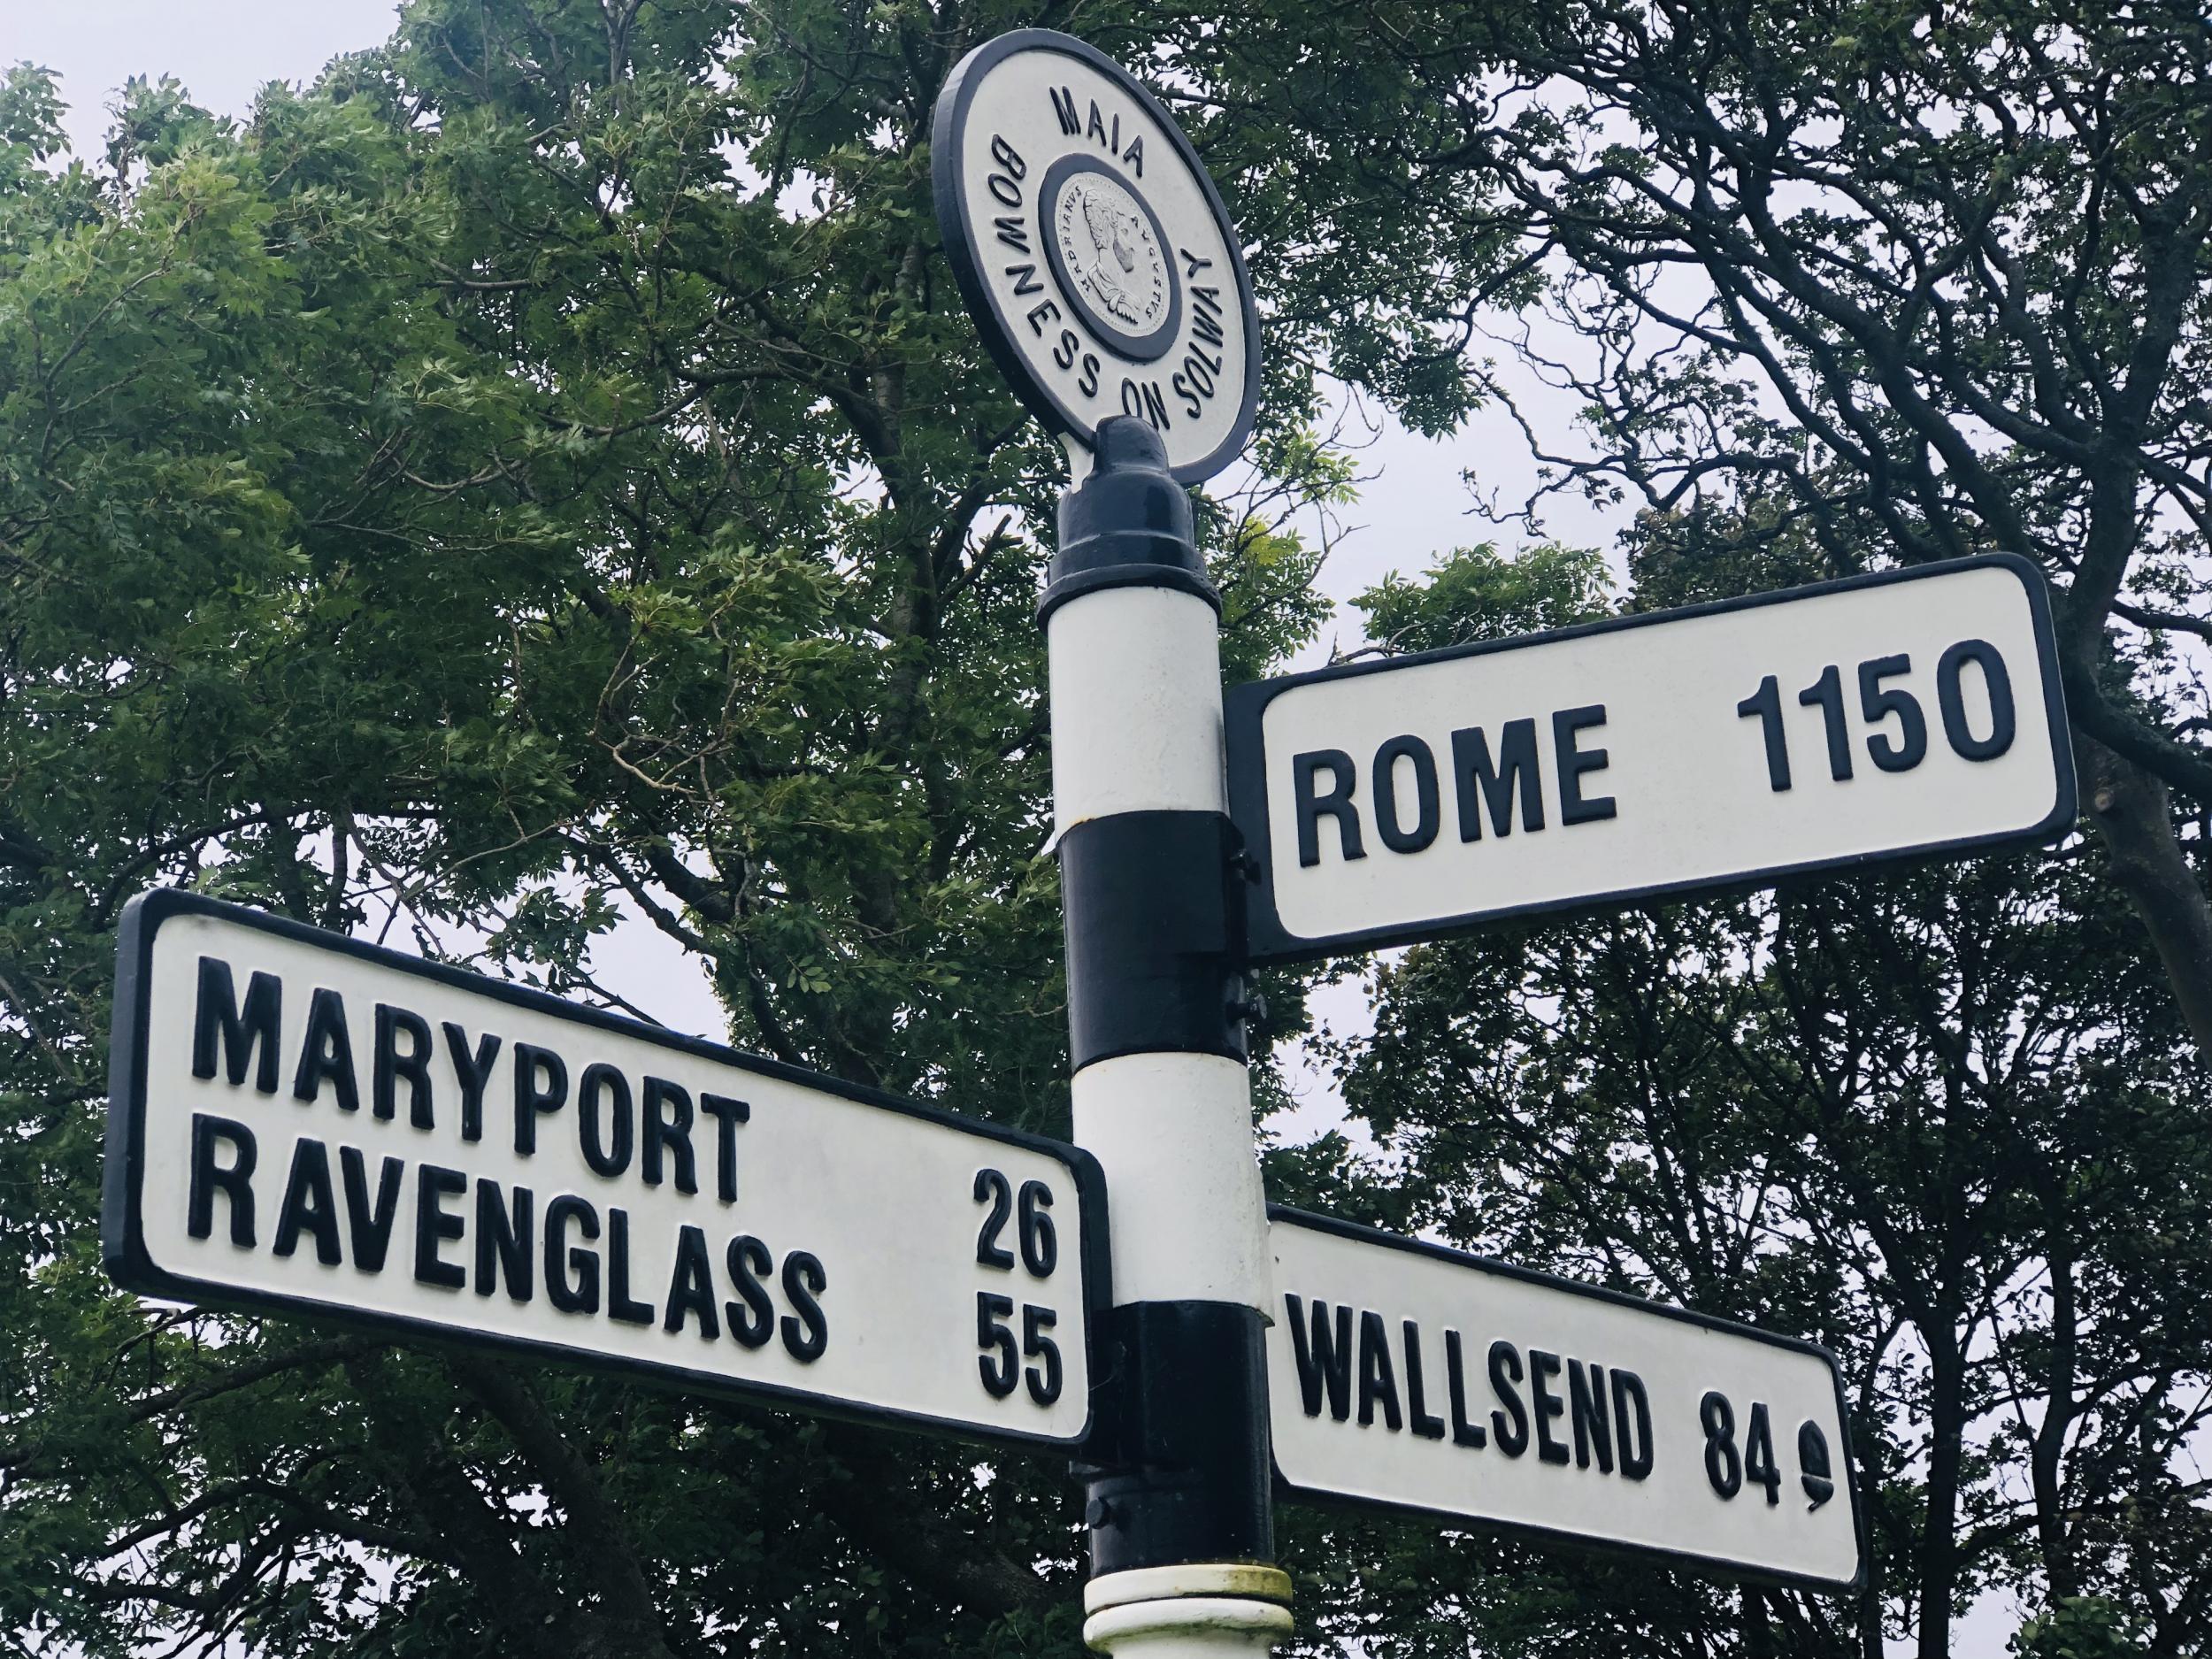 Long haul: a signpost in the Cumbrian village of Bowness-on-Solway